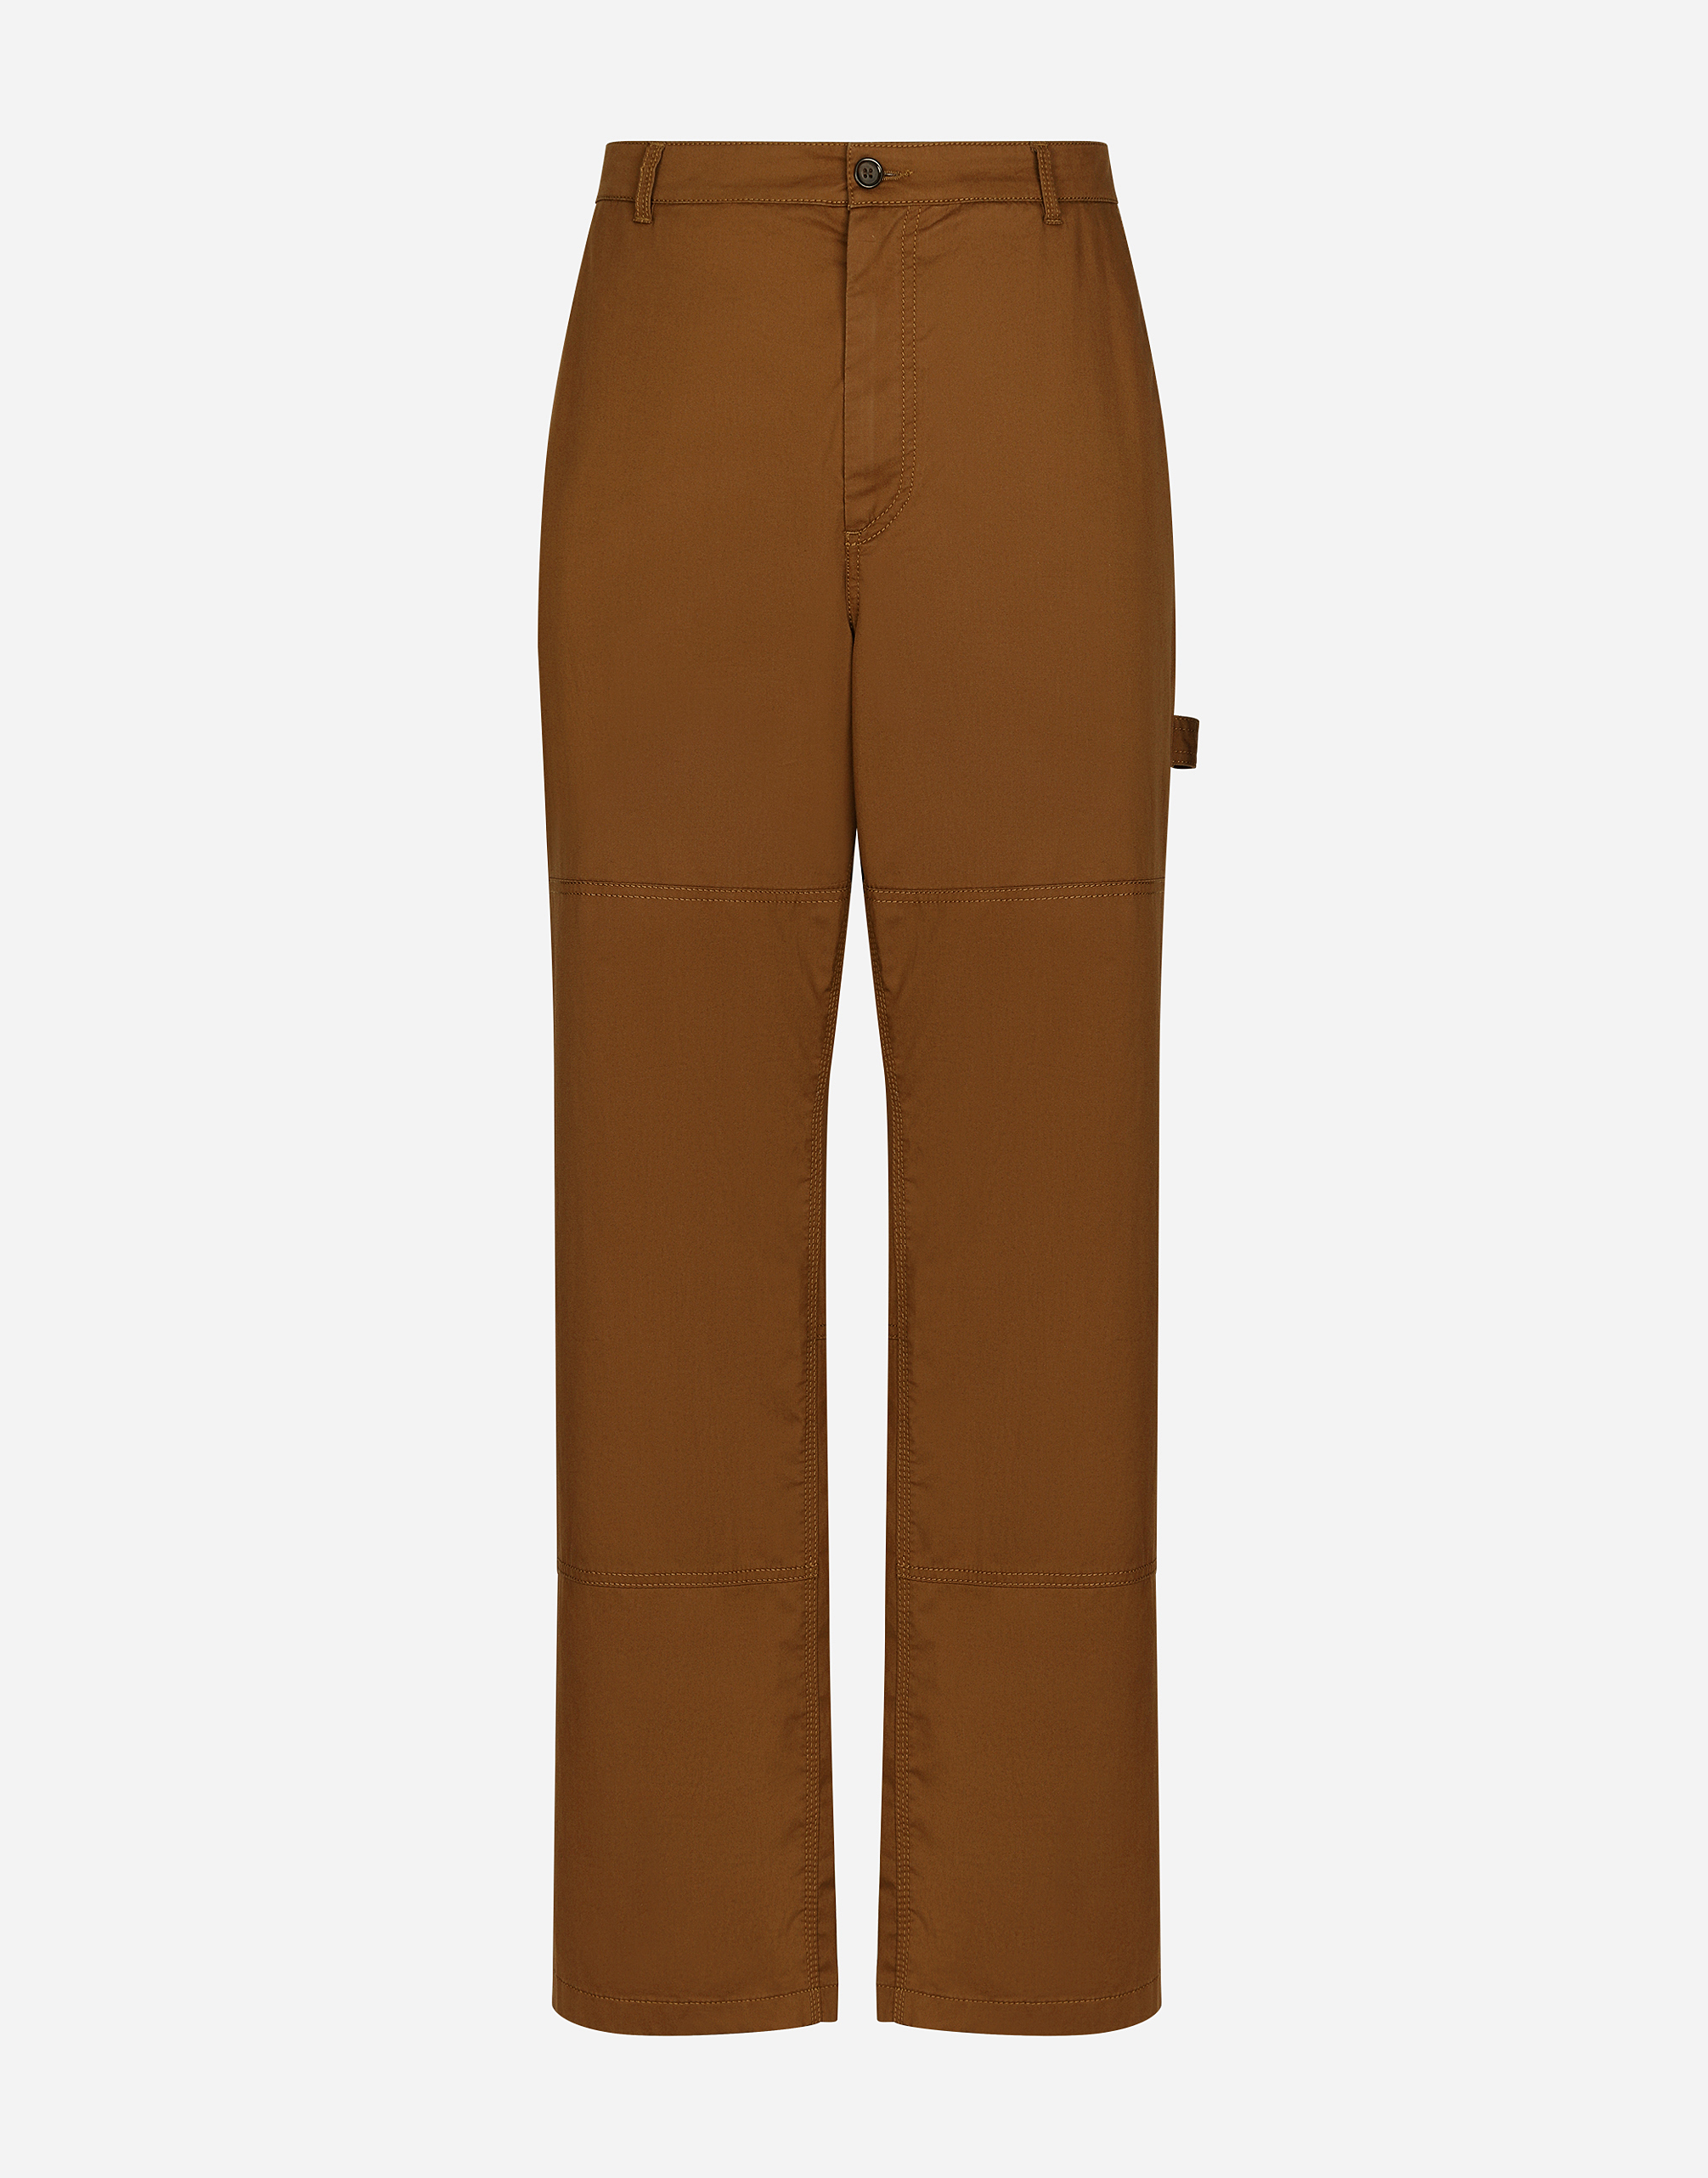 Stretch cotton worker pants with brand plate in Brown